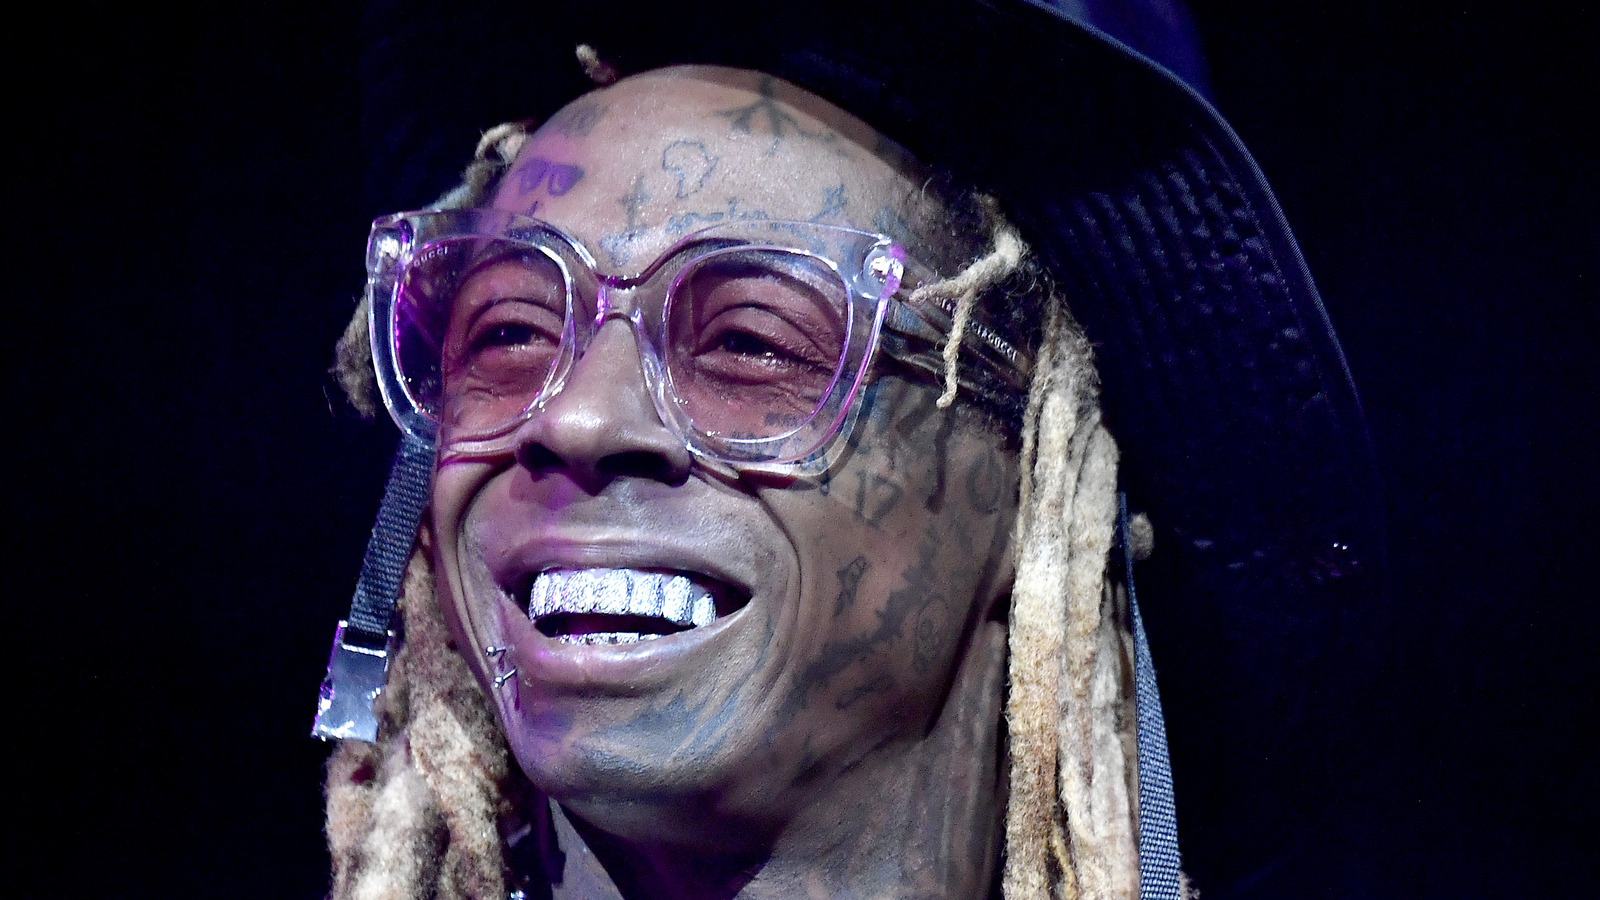 The Transformation Of Lil Wayne From 8 To 38 Years Old